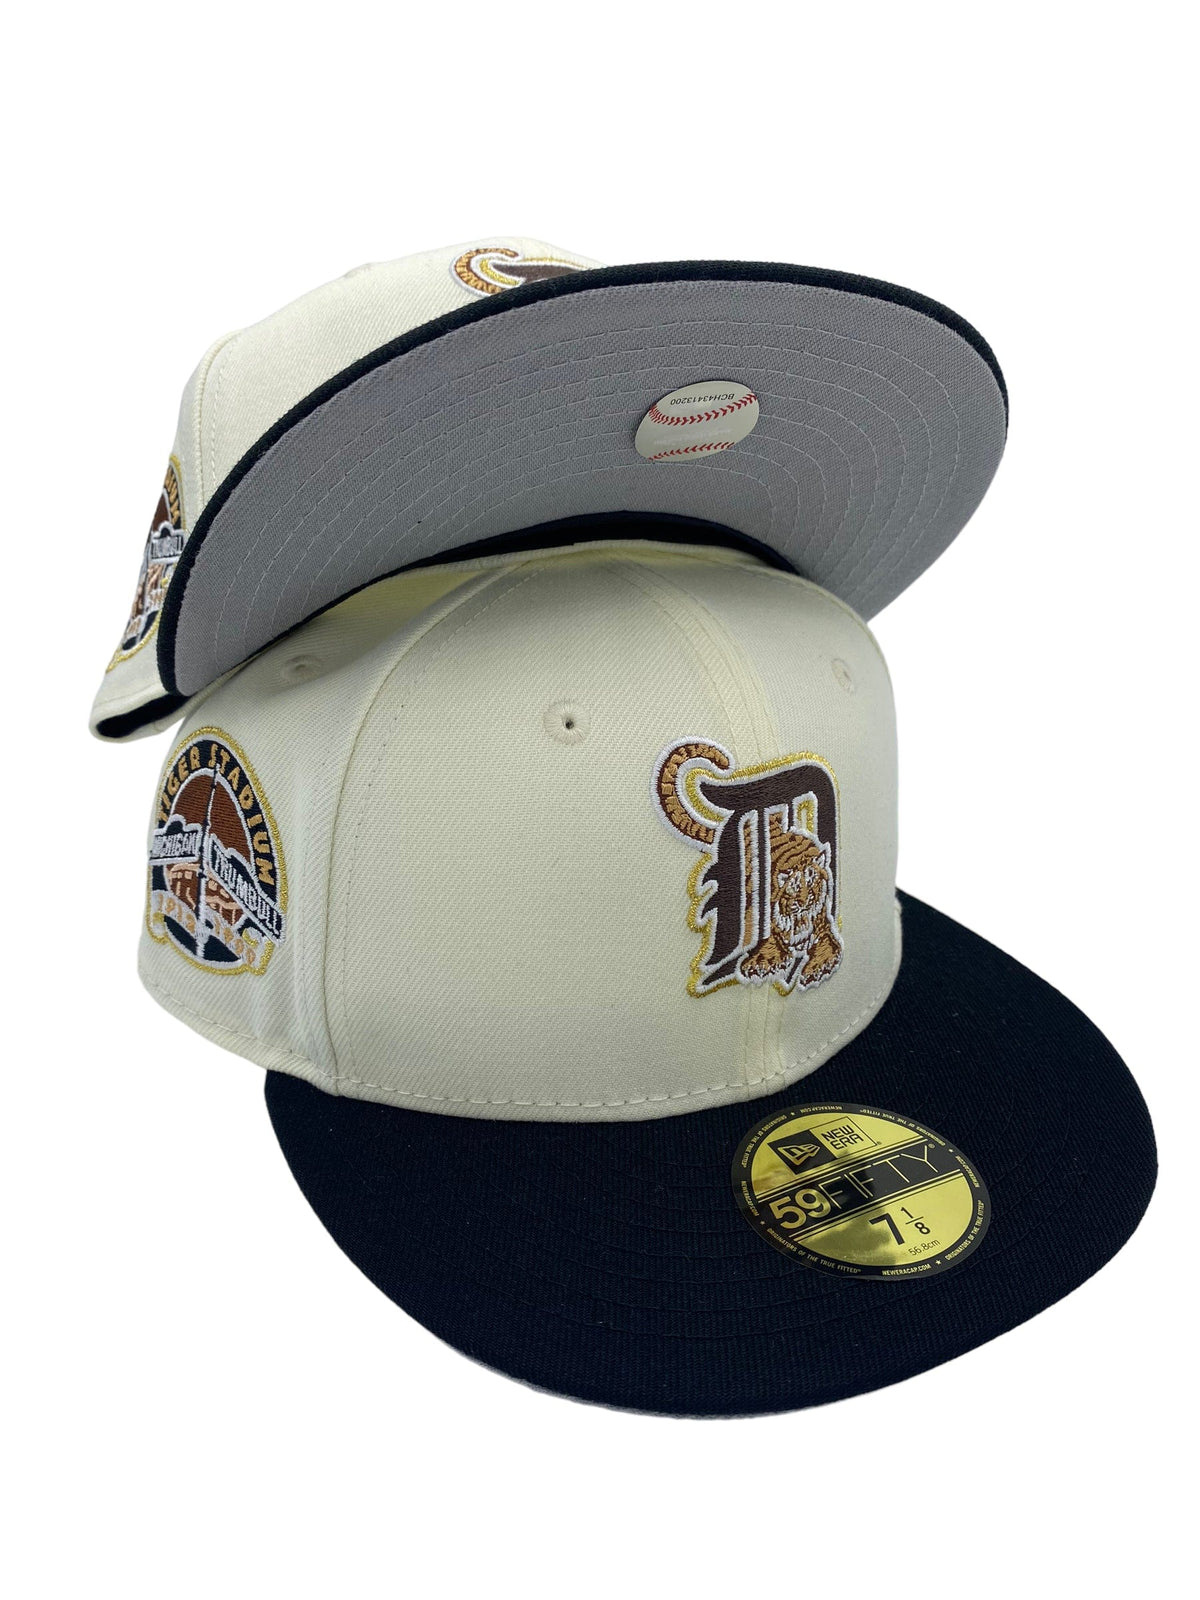 Detroit Tigers and U of M 59FIFTY Fitted Cap - Vintage Detroit